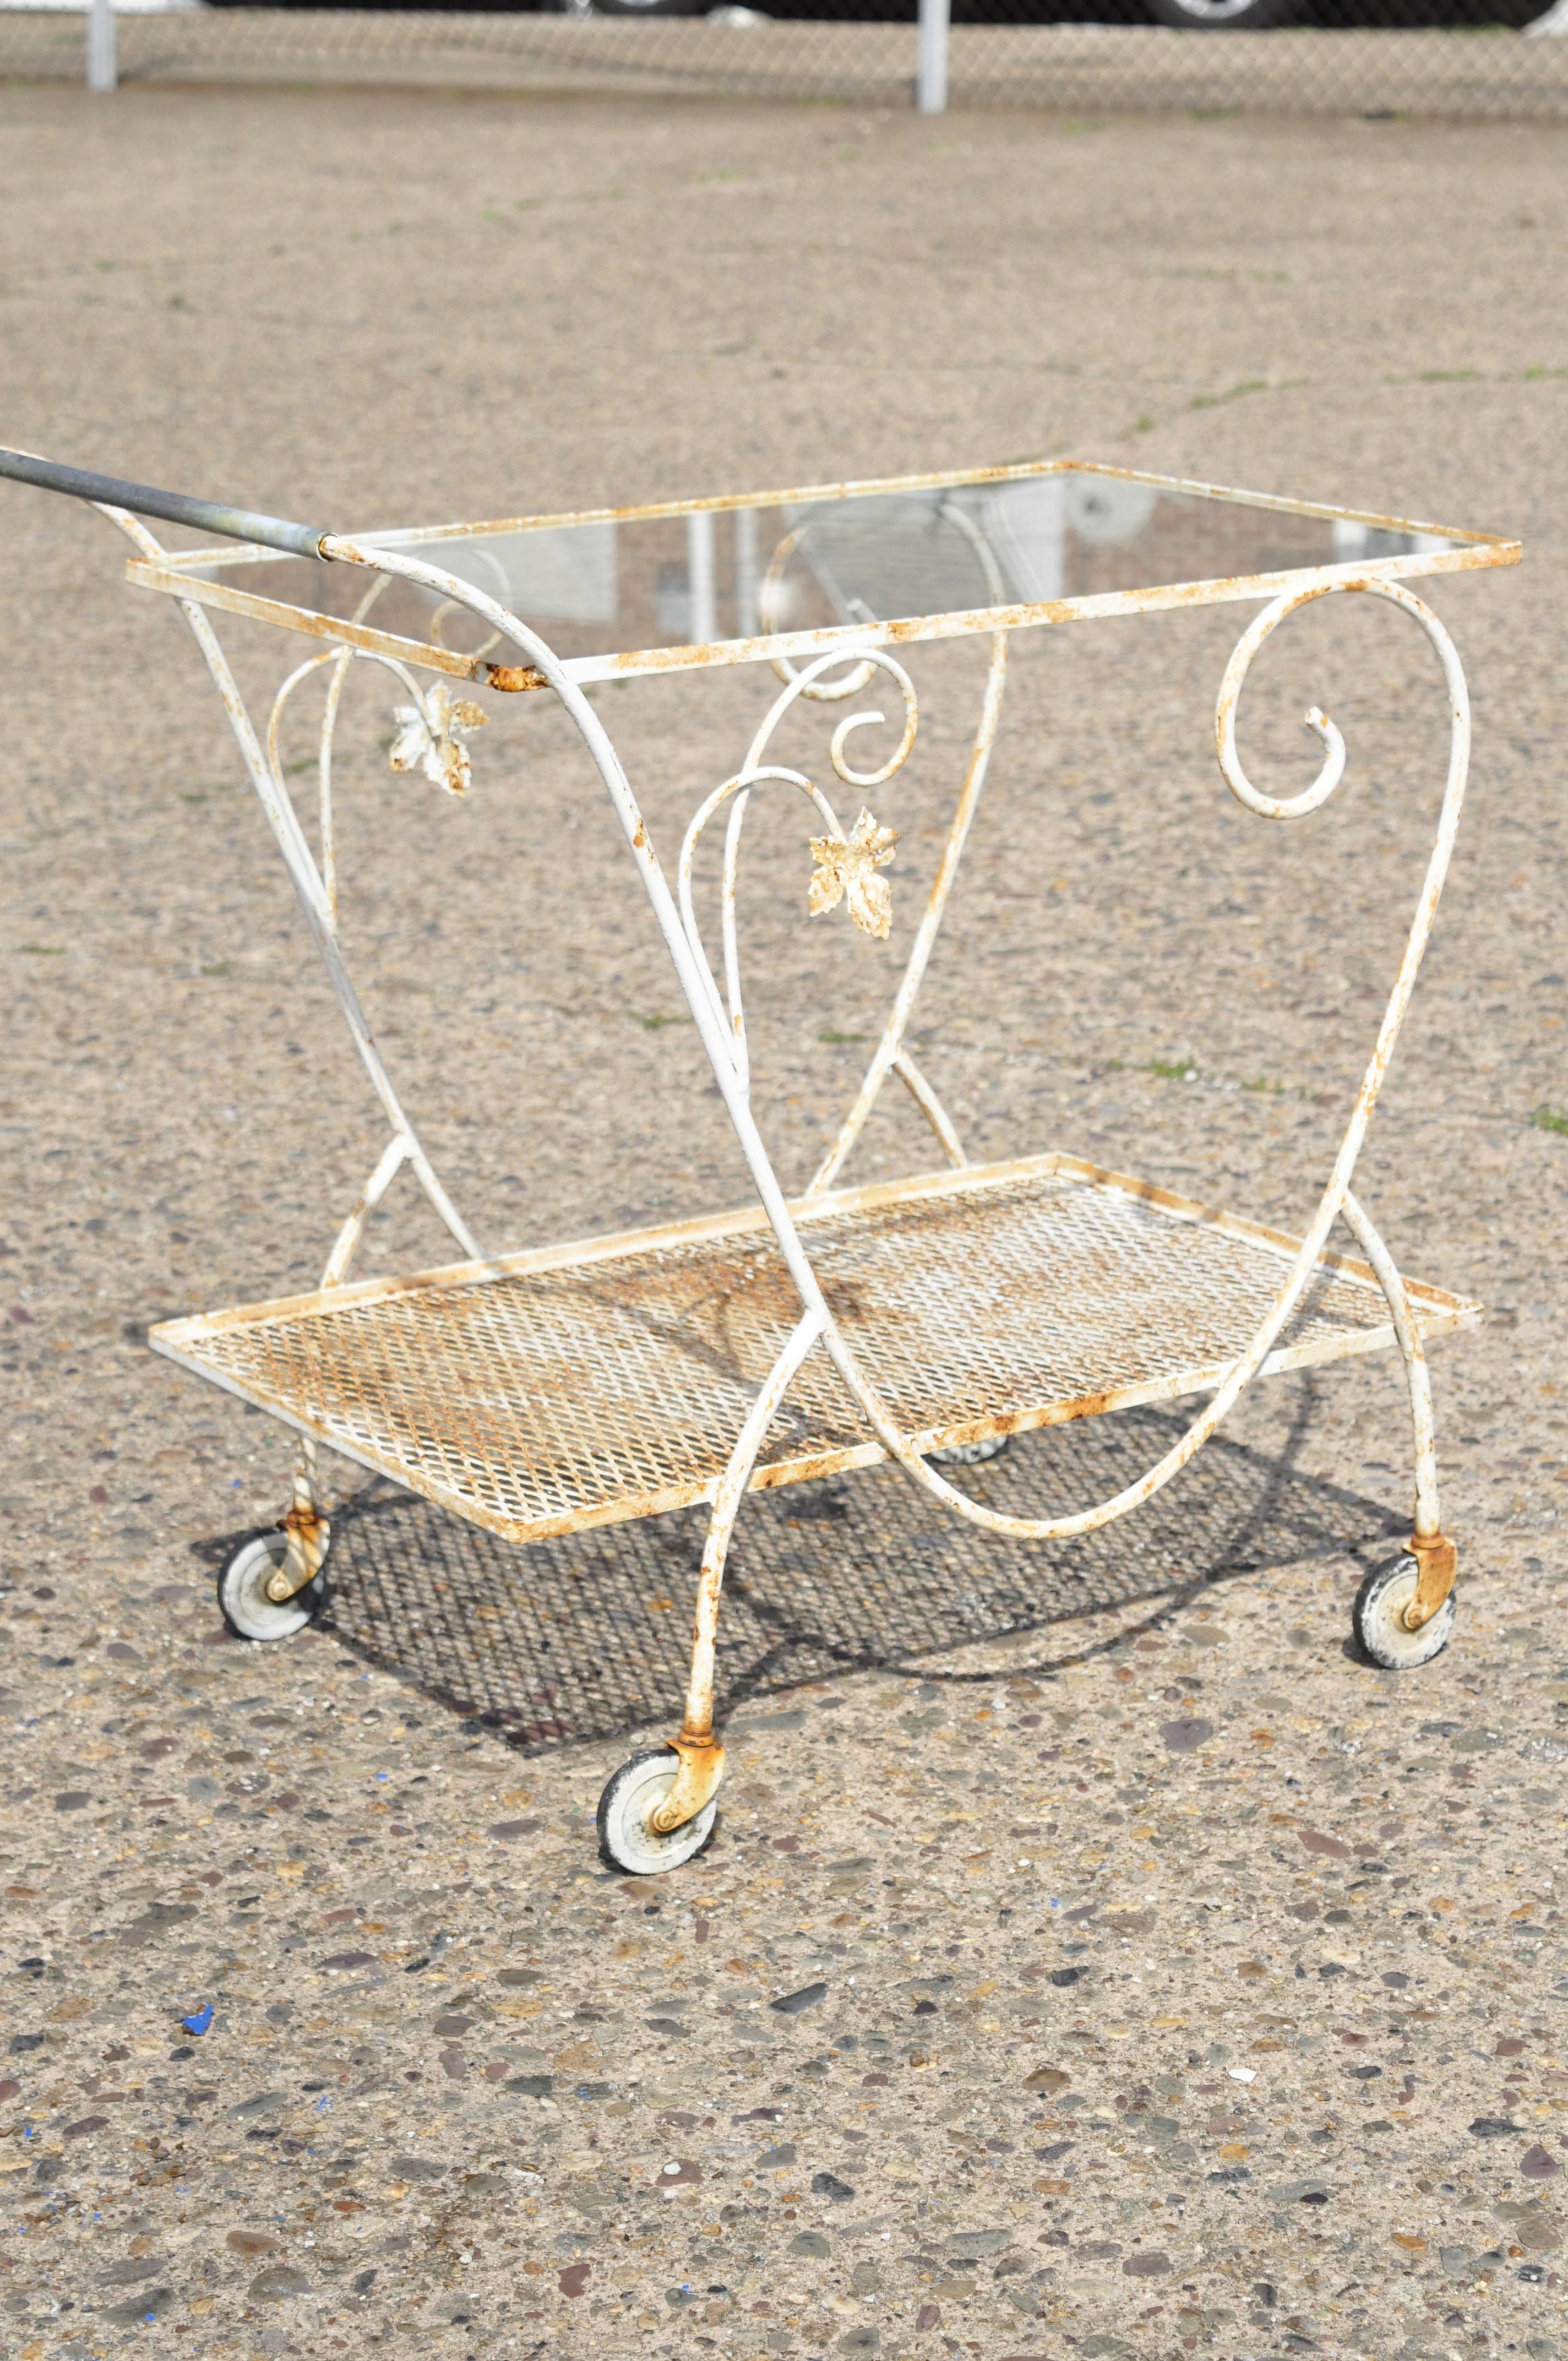 Vintage John Salterini Woodard scrolling leaf vine wrought iron garden bar cart. Item features lower mesh tier, leafy scrollwork, 1 glass shelf, very nice vintage item, quality American craftsmanship, great style and form. Circa mid 20th century.